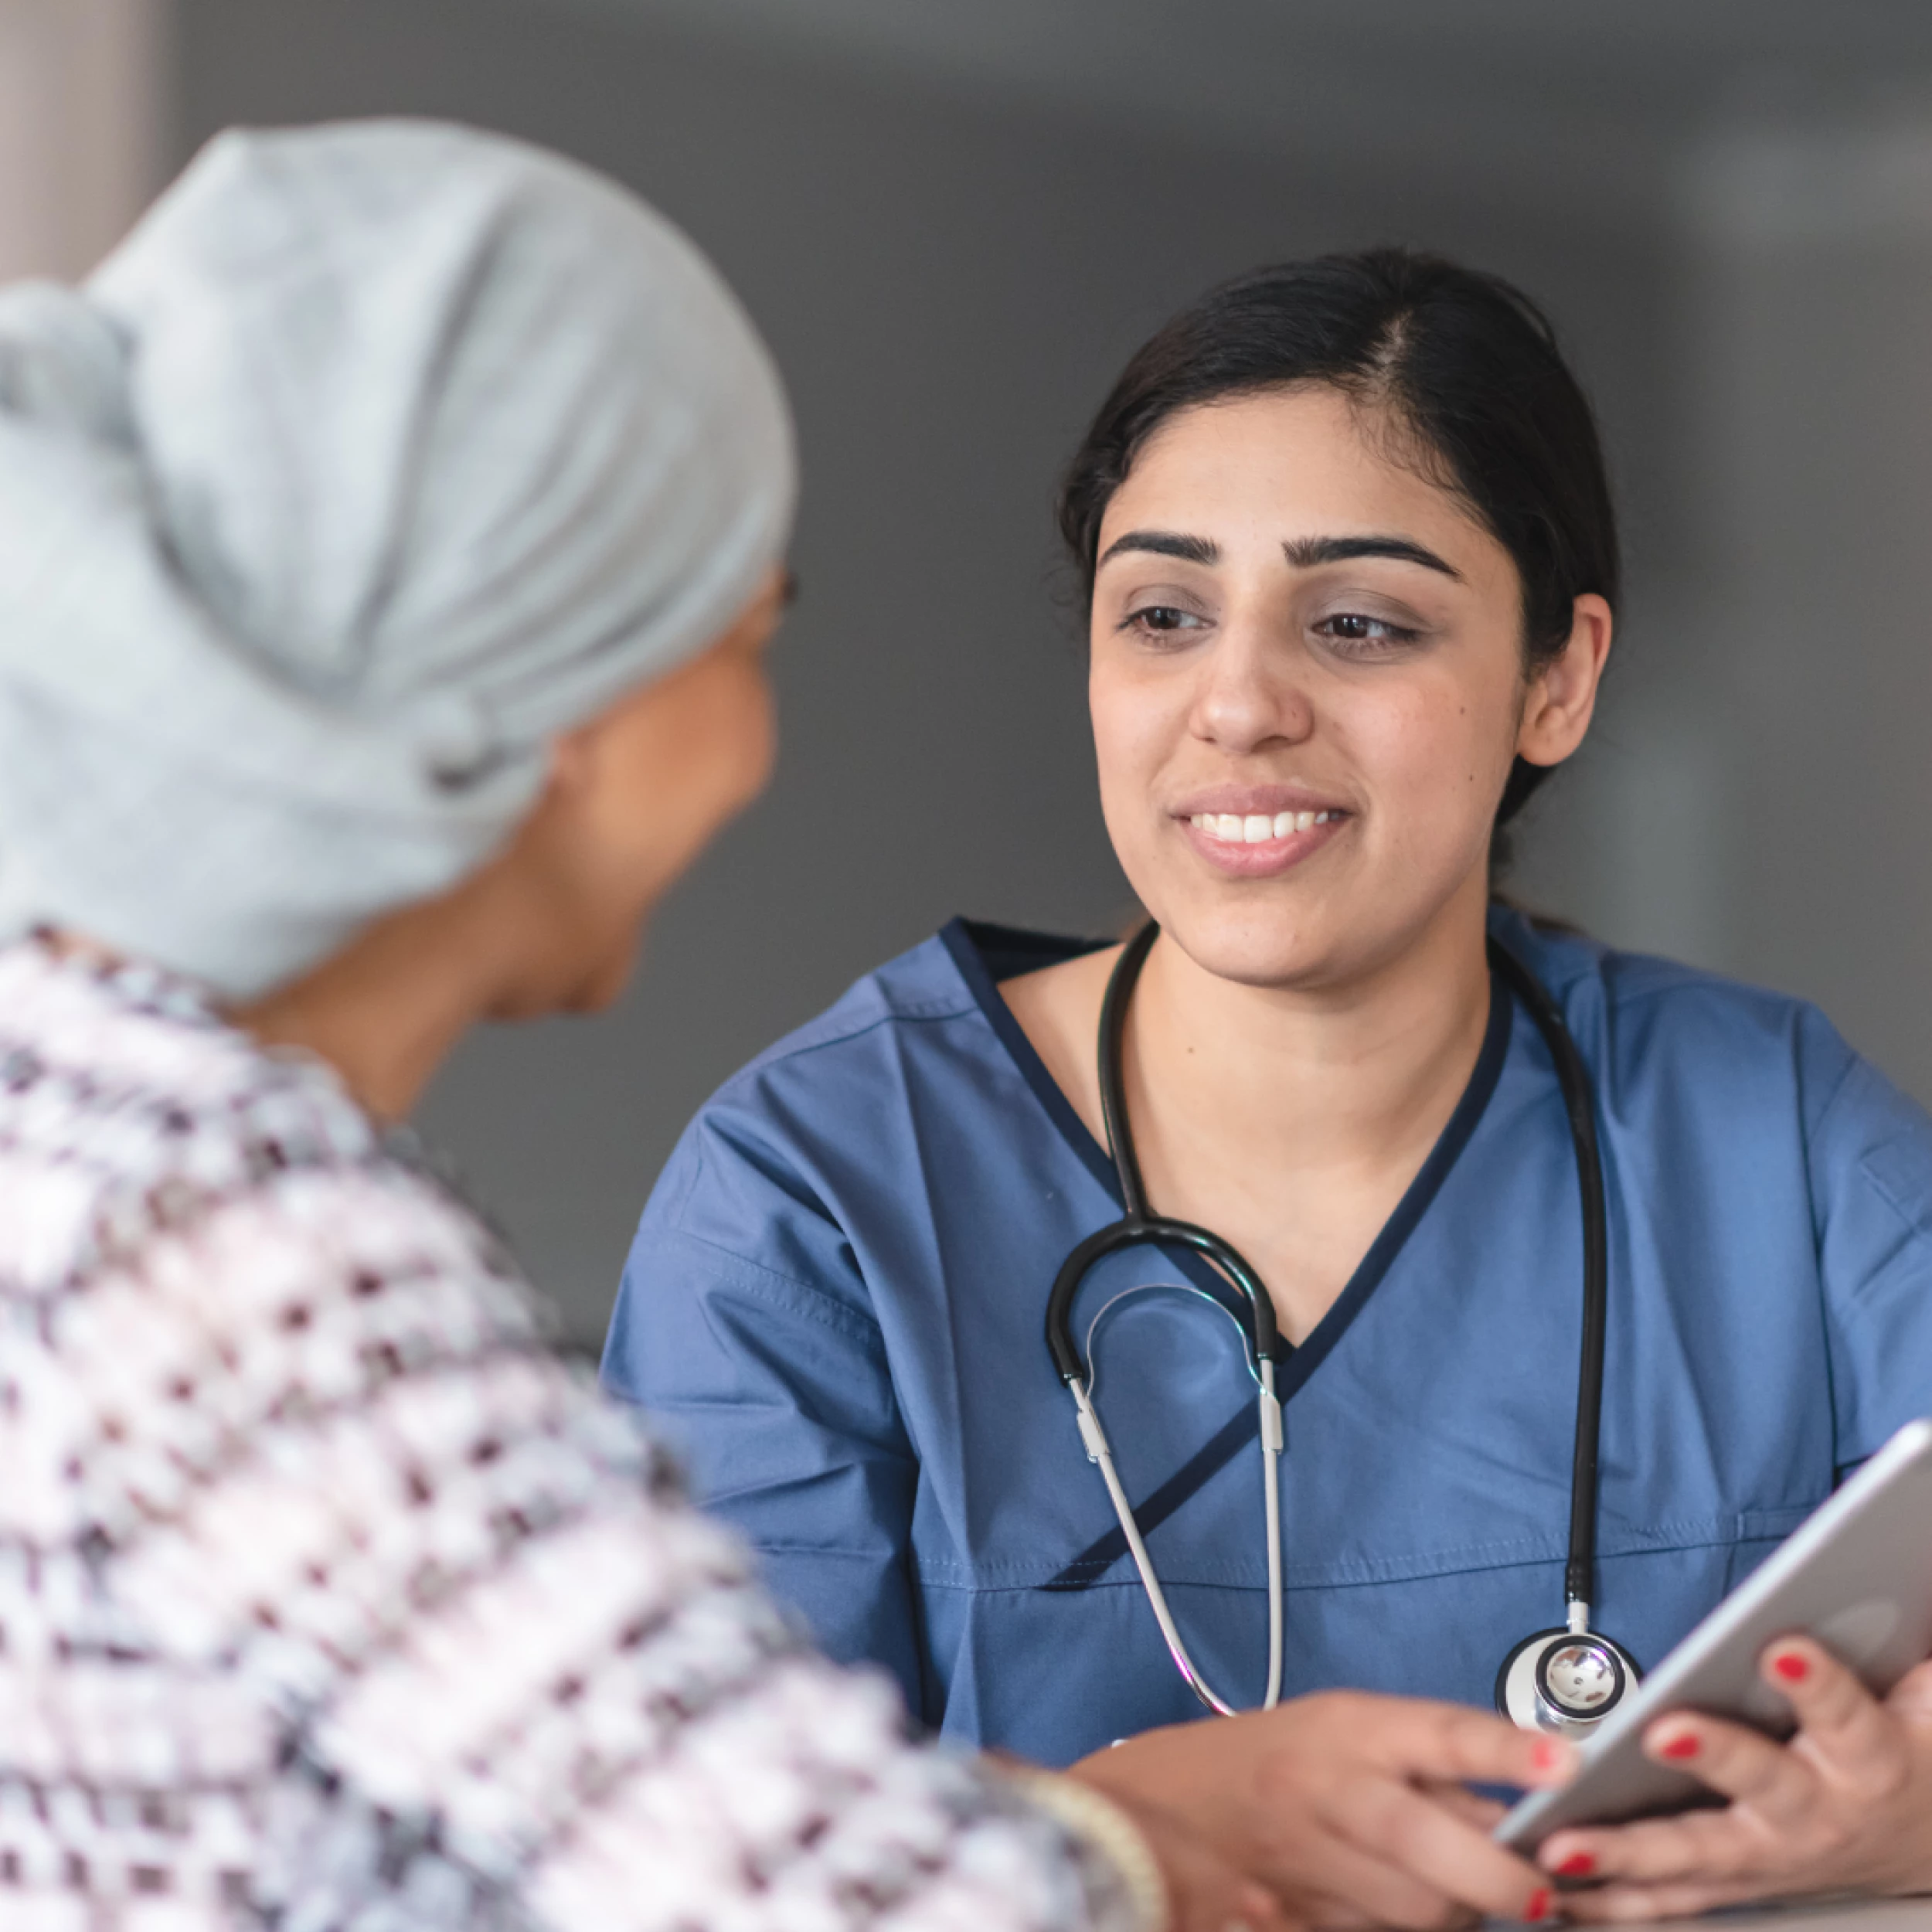 Cancer doctor consulting with patient (stock image)